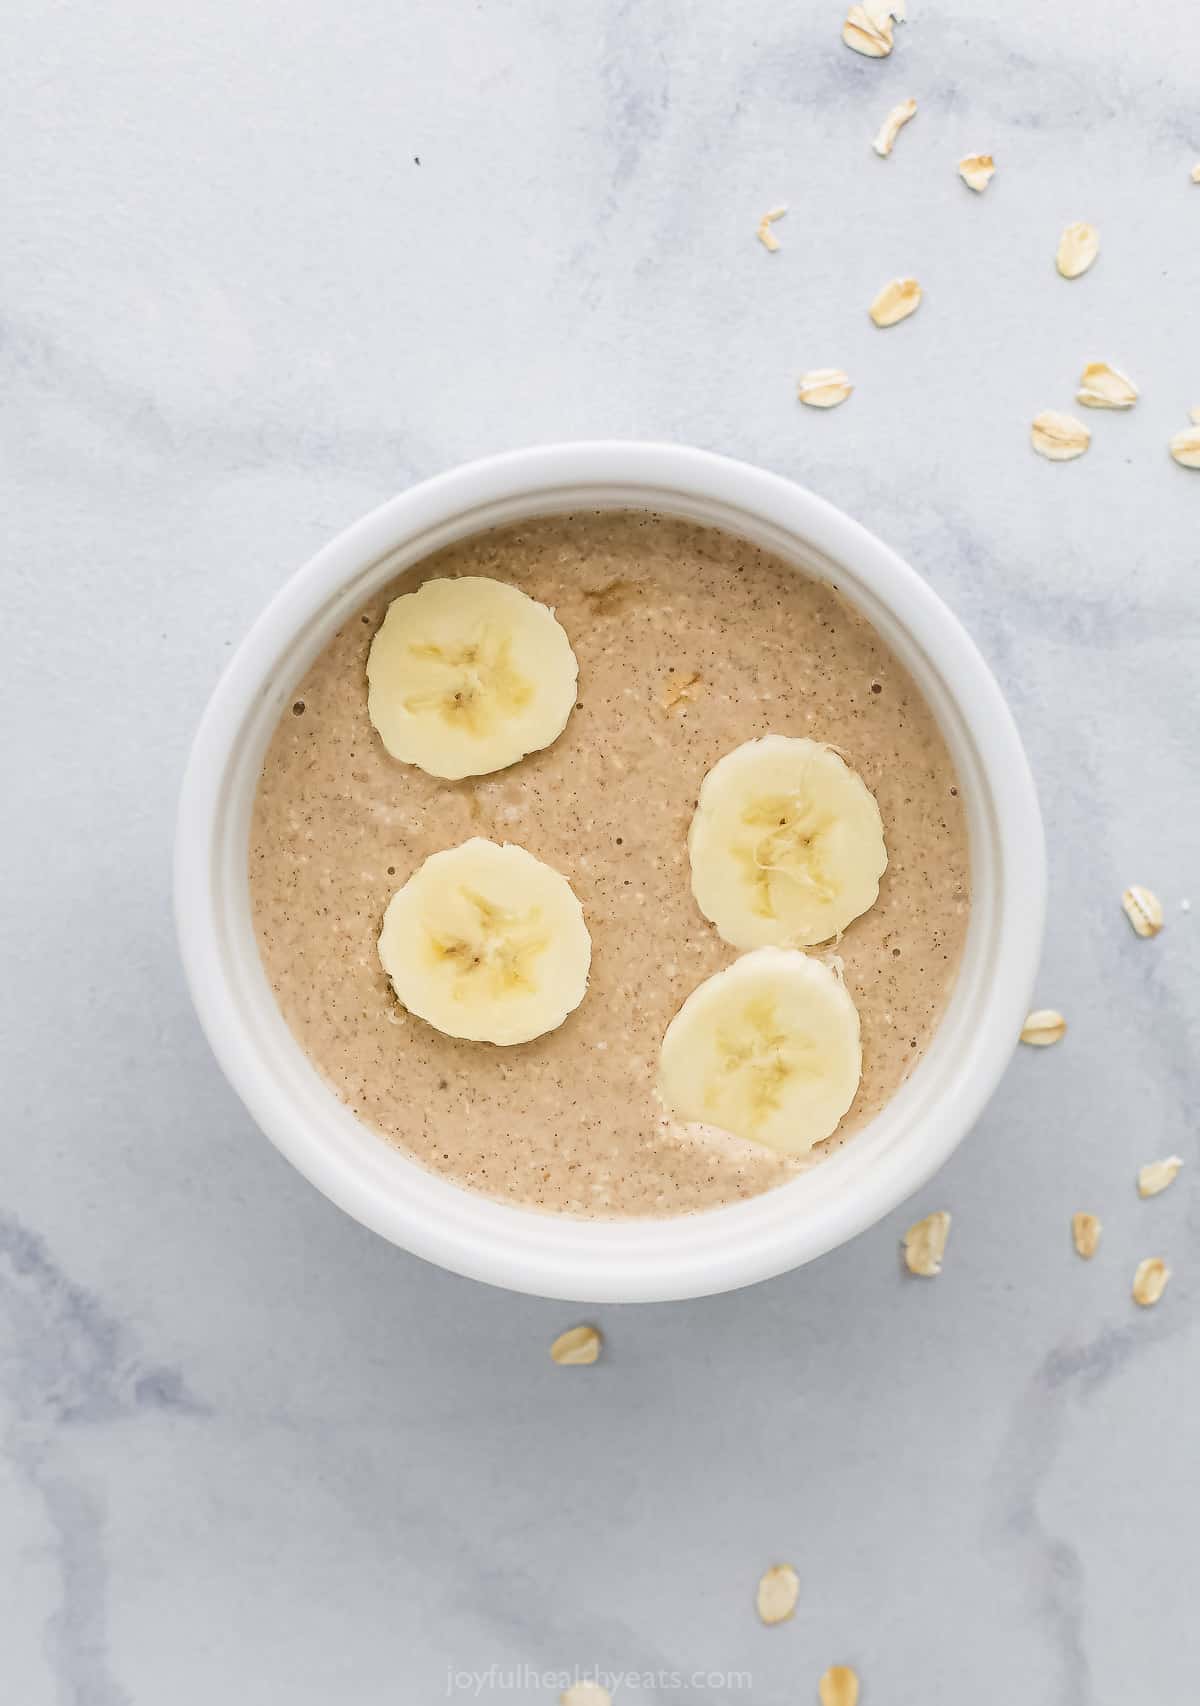 An eight-ounce ramekin filled with the blended oat mixture with four banana slices on top